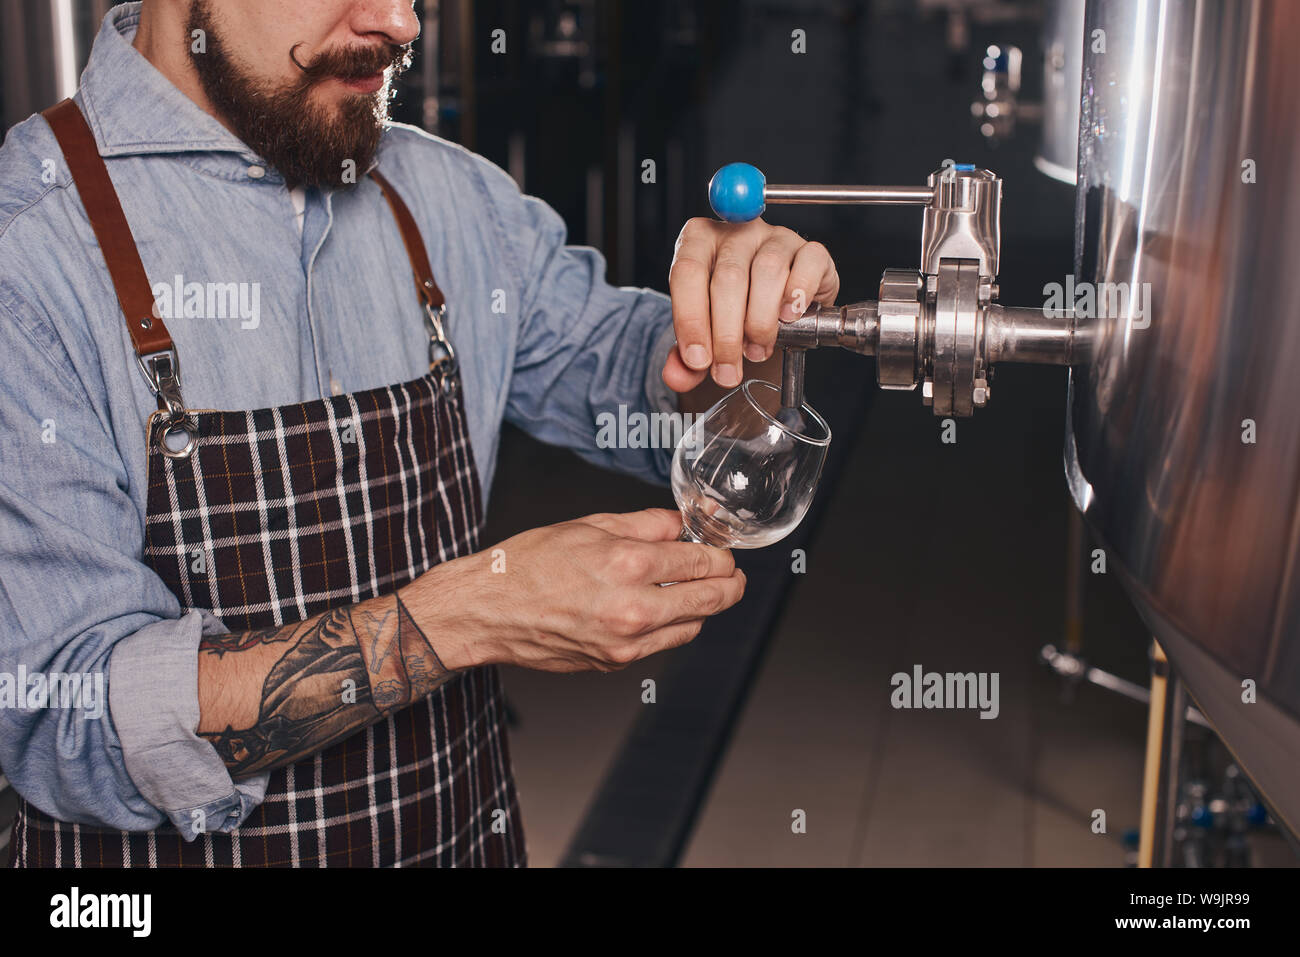 Close up of bartender at work pouring beer from the taps into clear glasses. Stock Photo